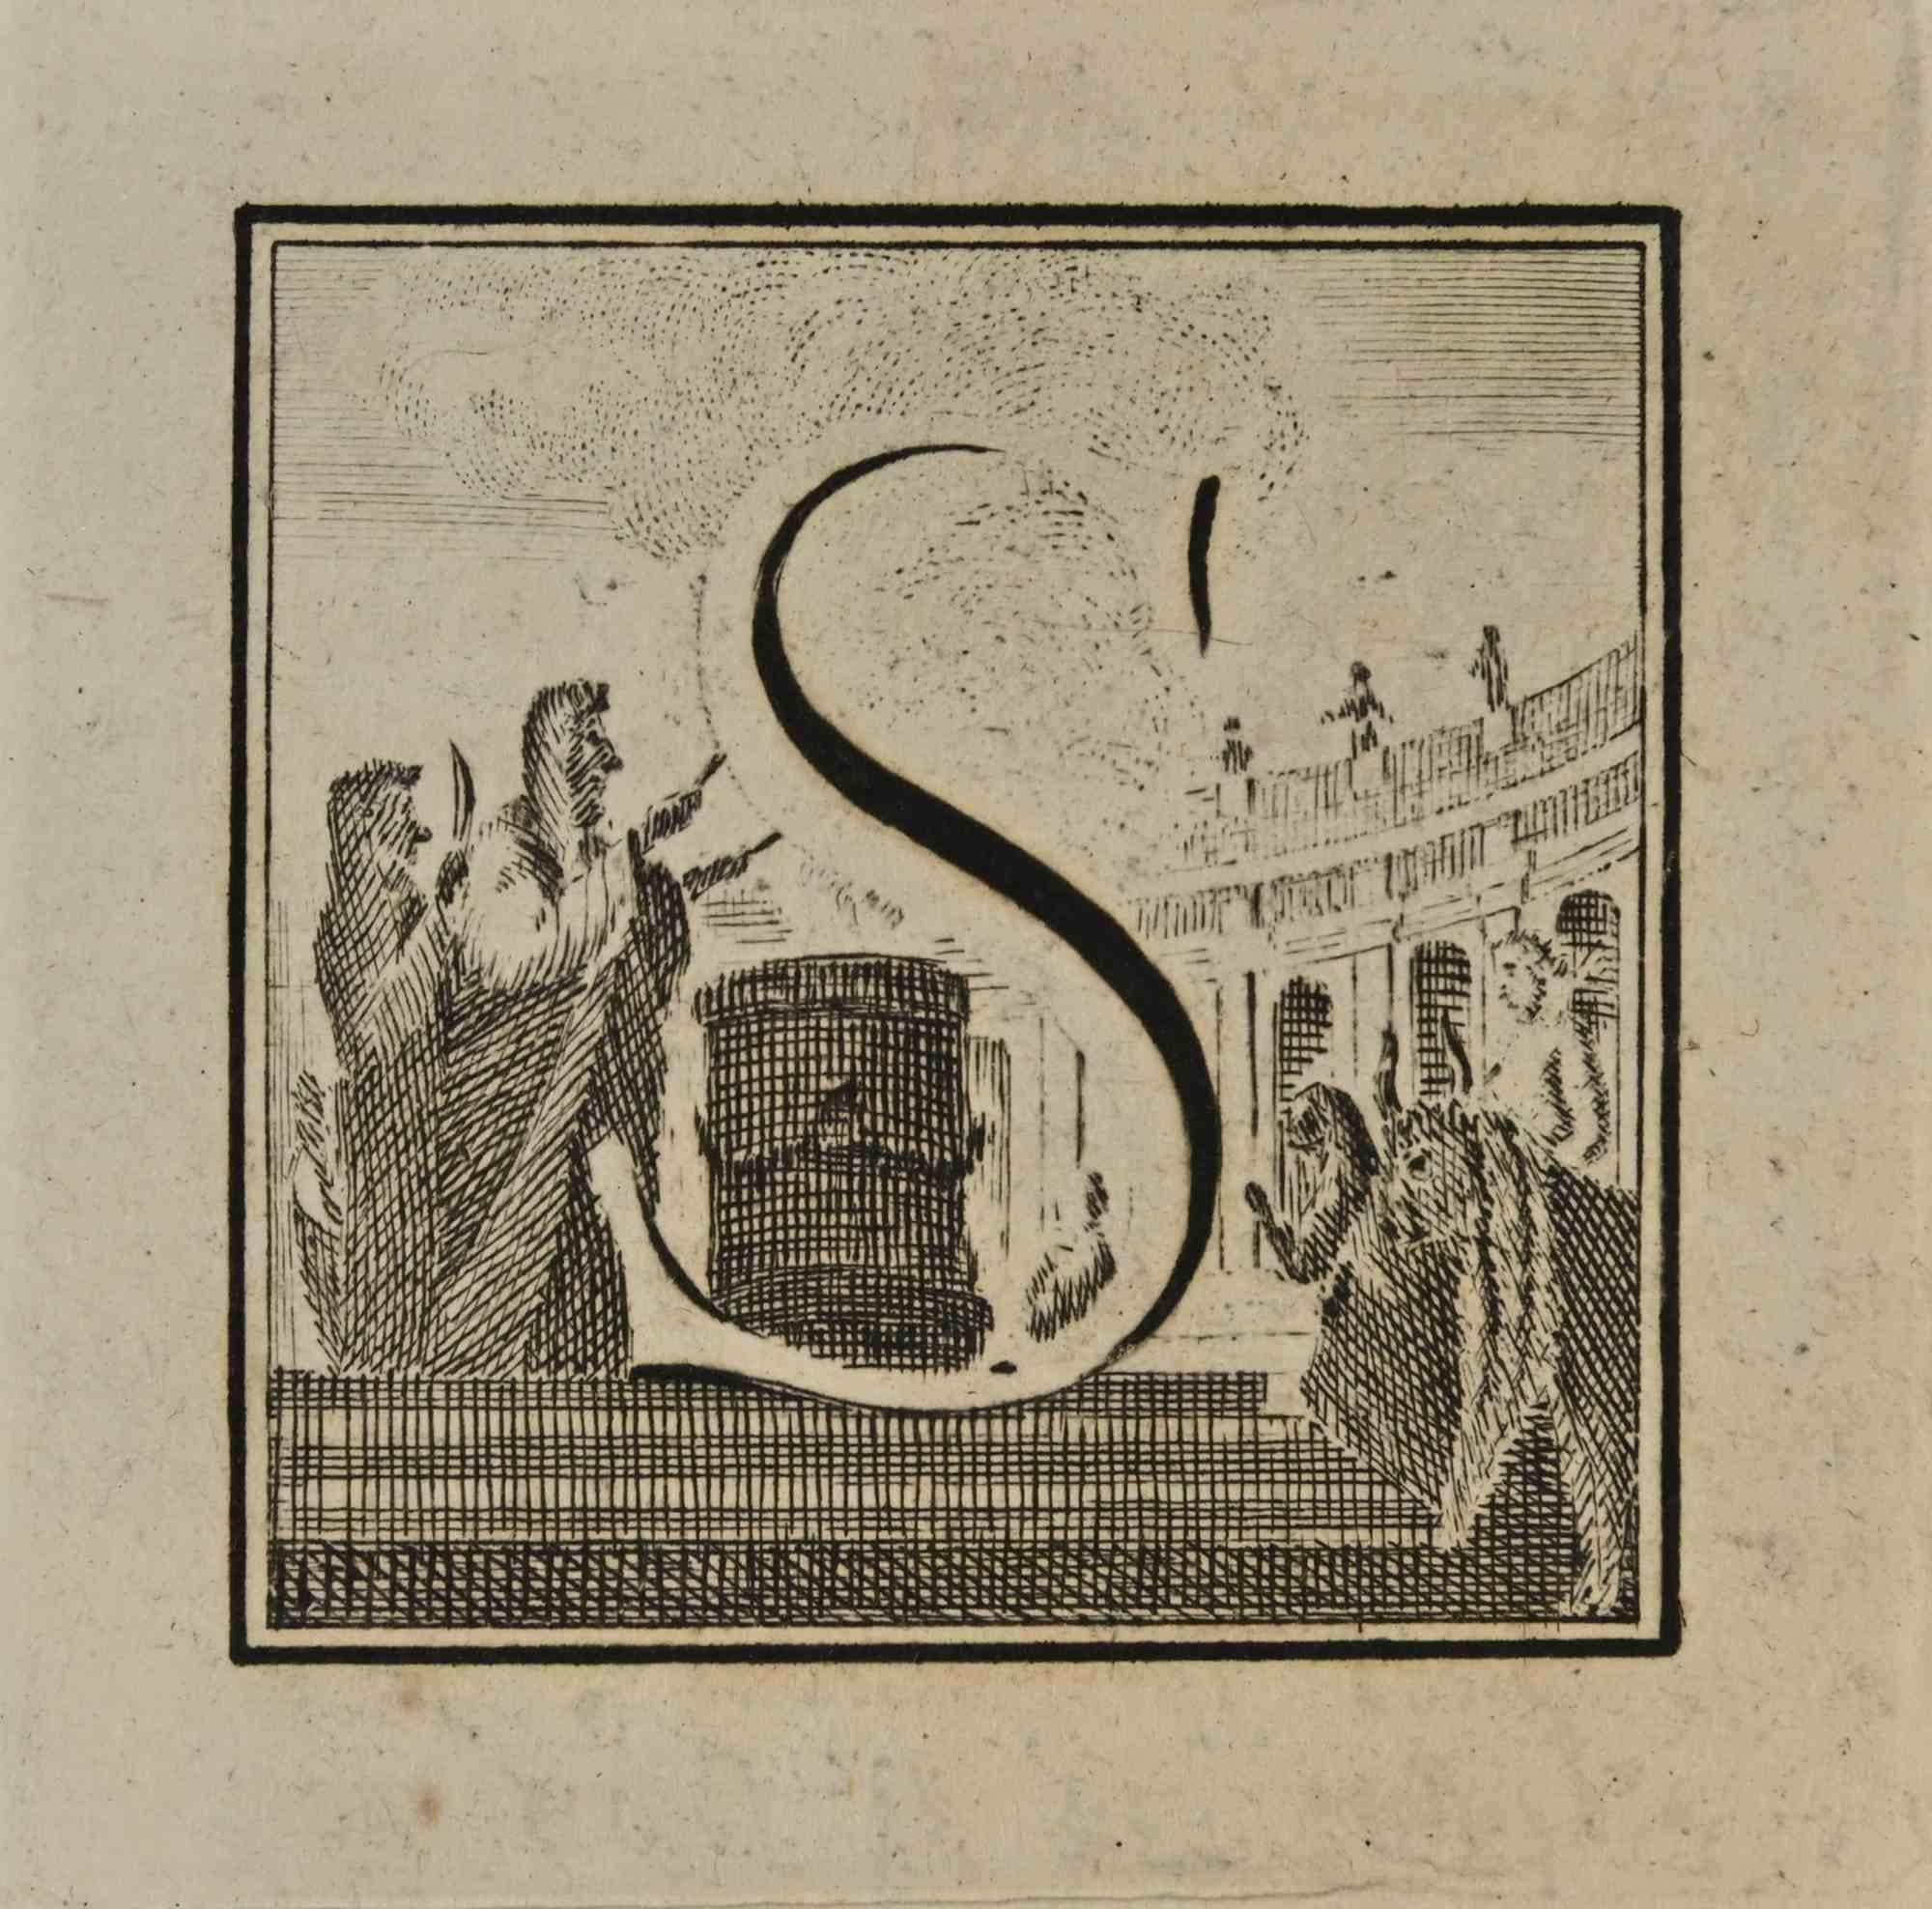 Letter of the Alphabet S,  from the series "Antiquities of Herculaneum", is an etching on paper realized by Luigi Vanvitelli in the 18th century.

Good conditions.

The etching belongs to the print suite “Antiquities of Herculaneum Exposed”